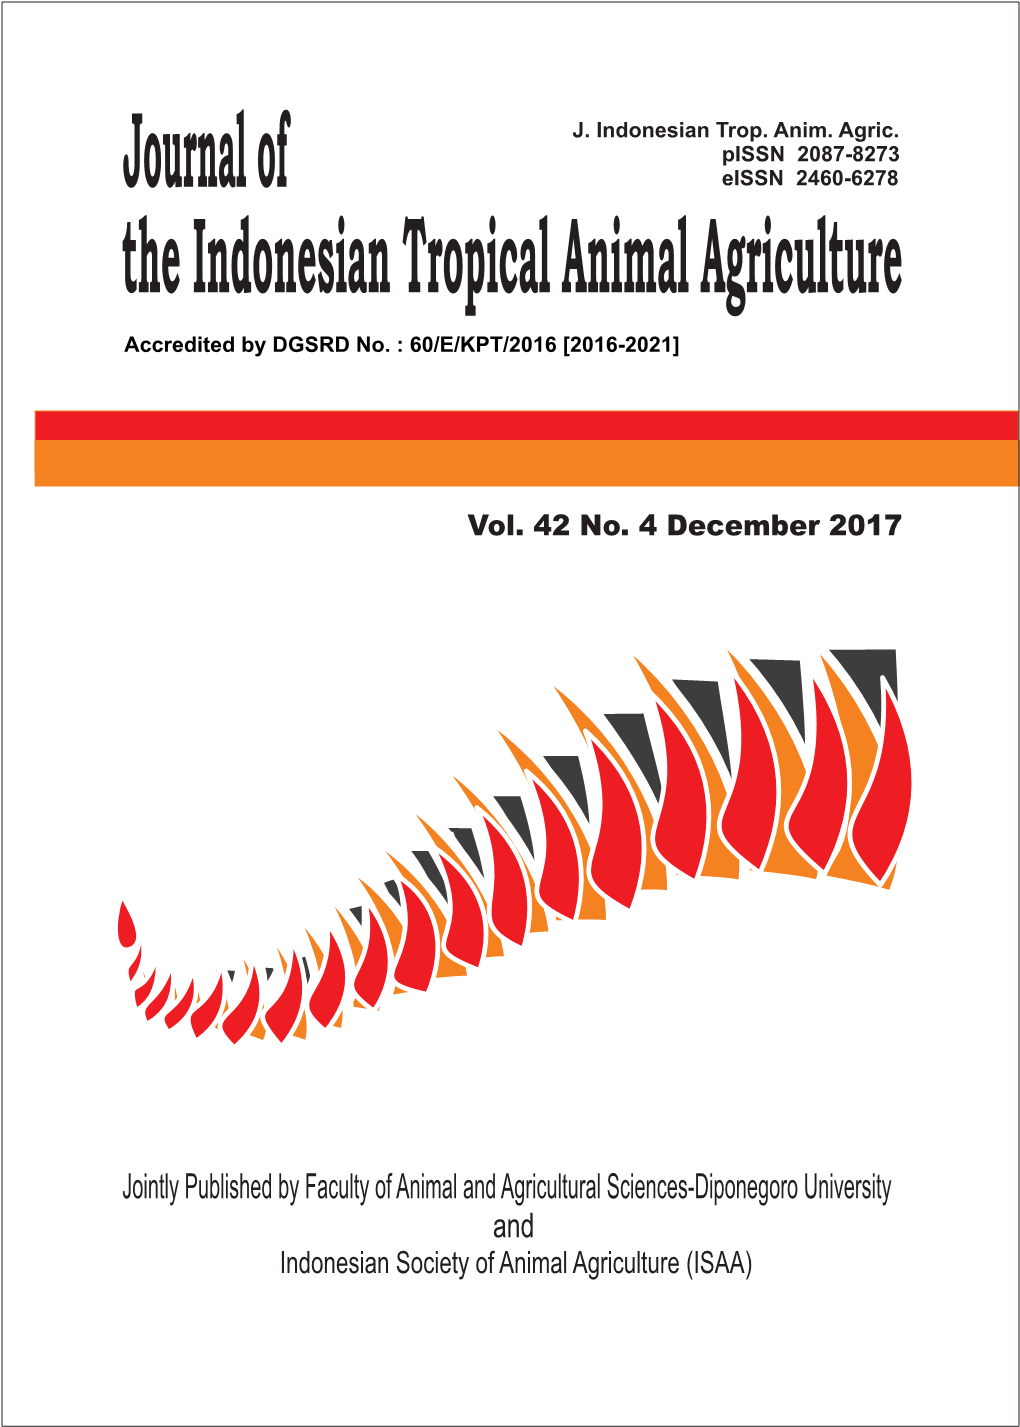 Jointly Published by Faculty of Animal and Agricultural Sciences-Diponegoro University and Indonesian Society of Animal Agriculture (ISAA)